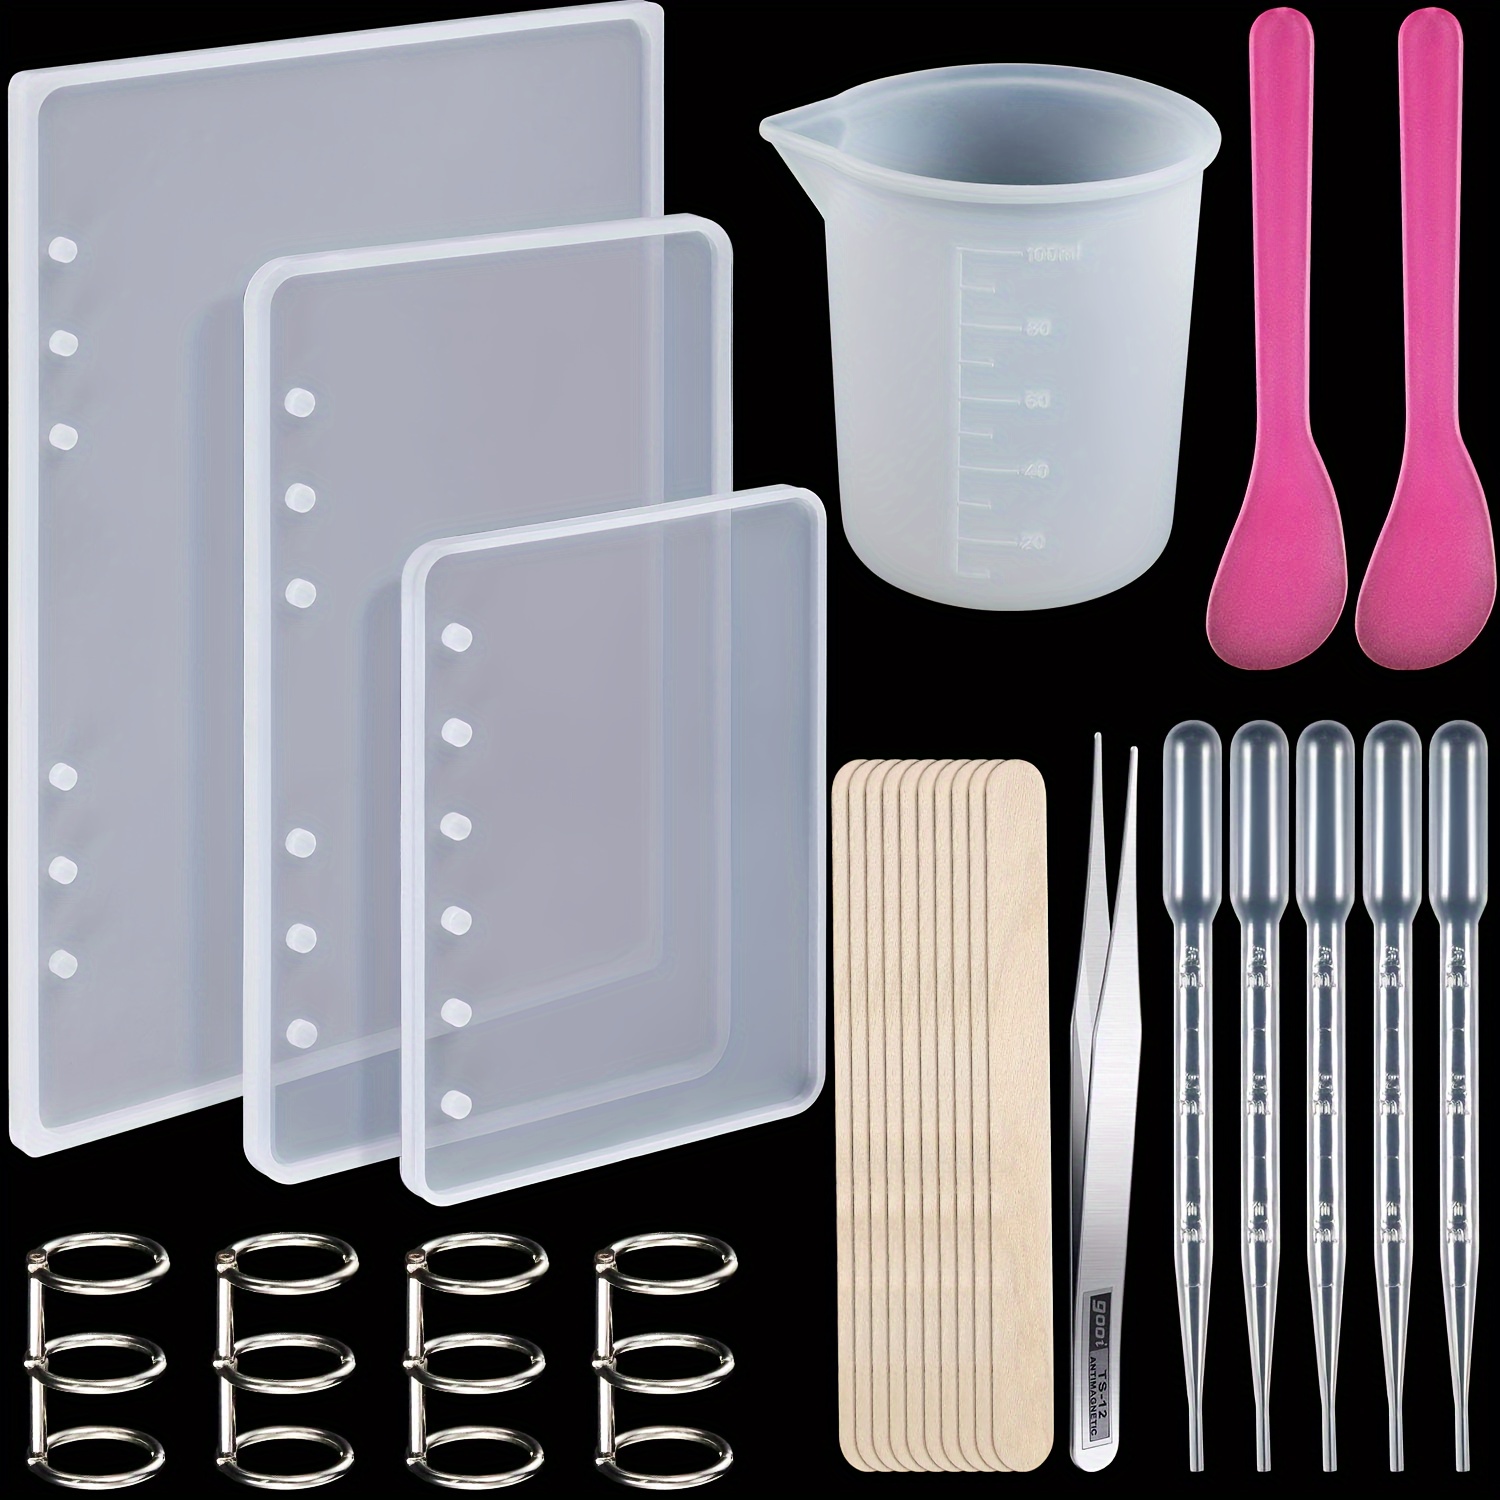 

Diy Notebook Cover Craft Kit: 26-piece Silicone Mold Set For A5, A6, A7 Sizes - Includes Resin Molds, Book Rings, For Custom Creations